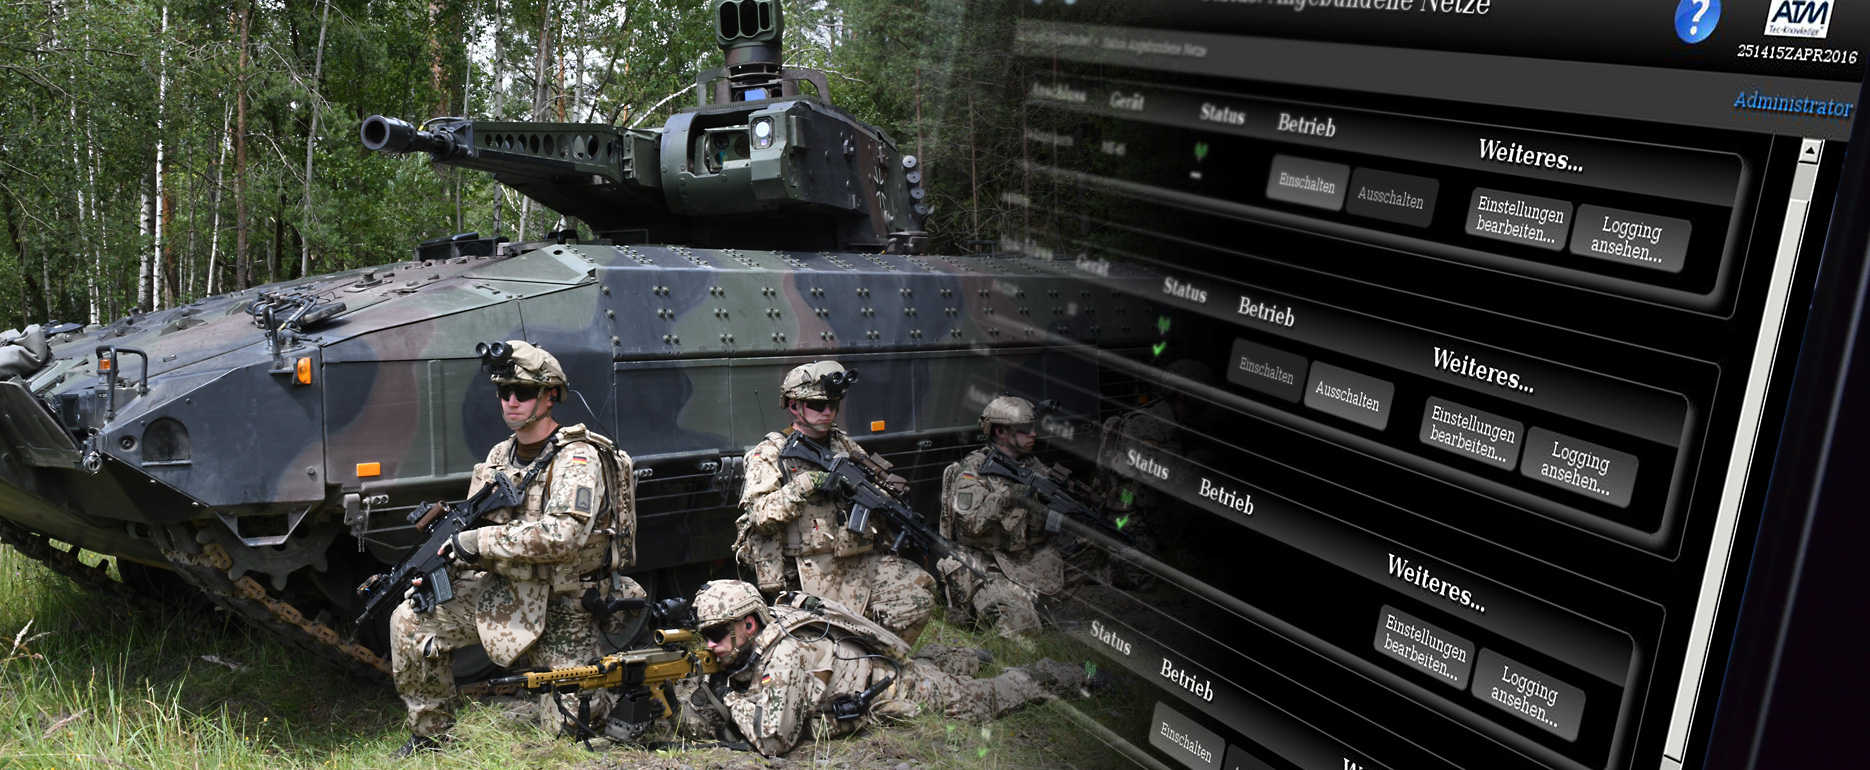 A platoon of soldiers in front of the PUMA infantry fighting vehicle and software interface